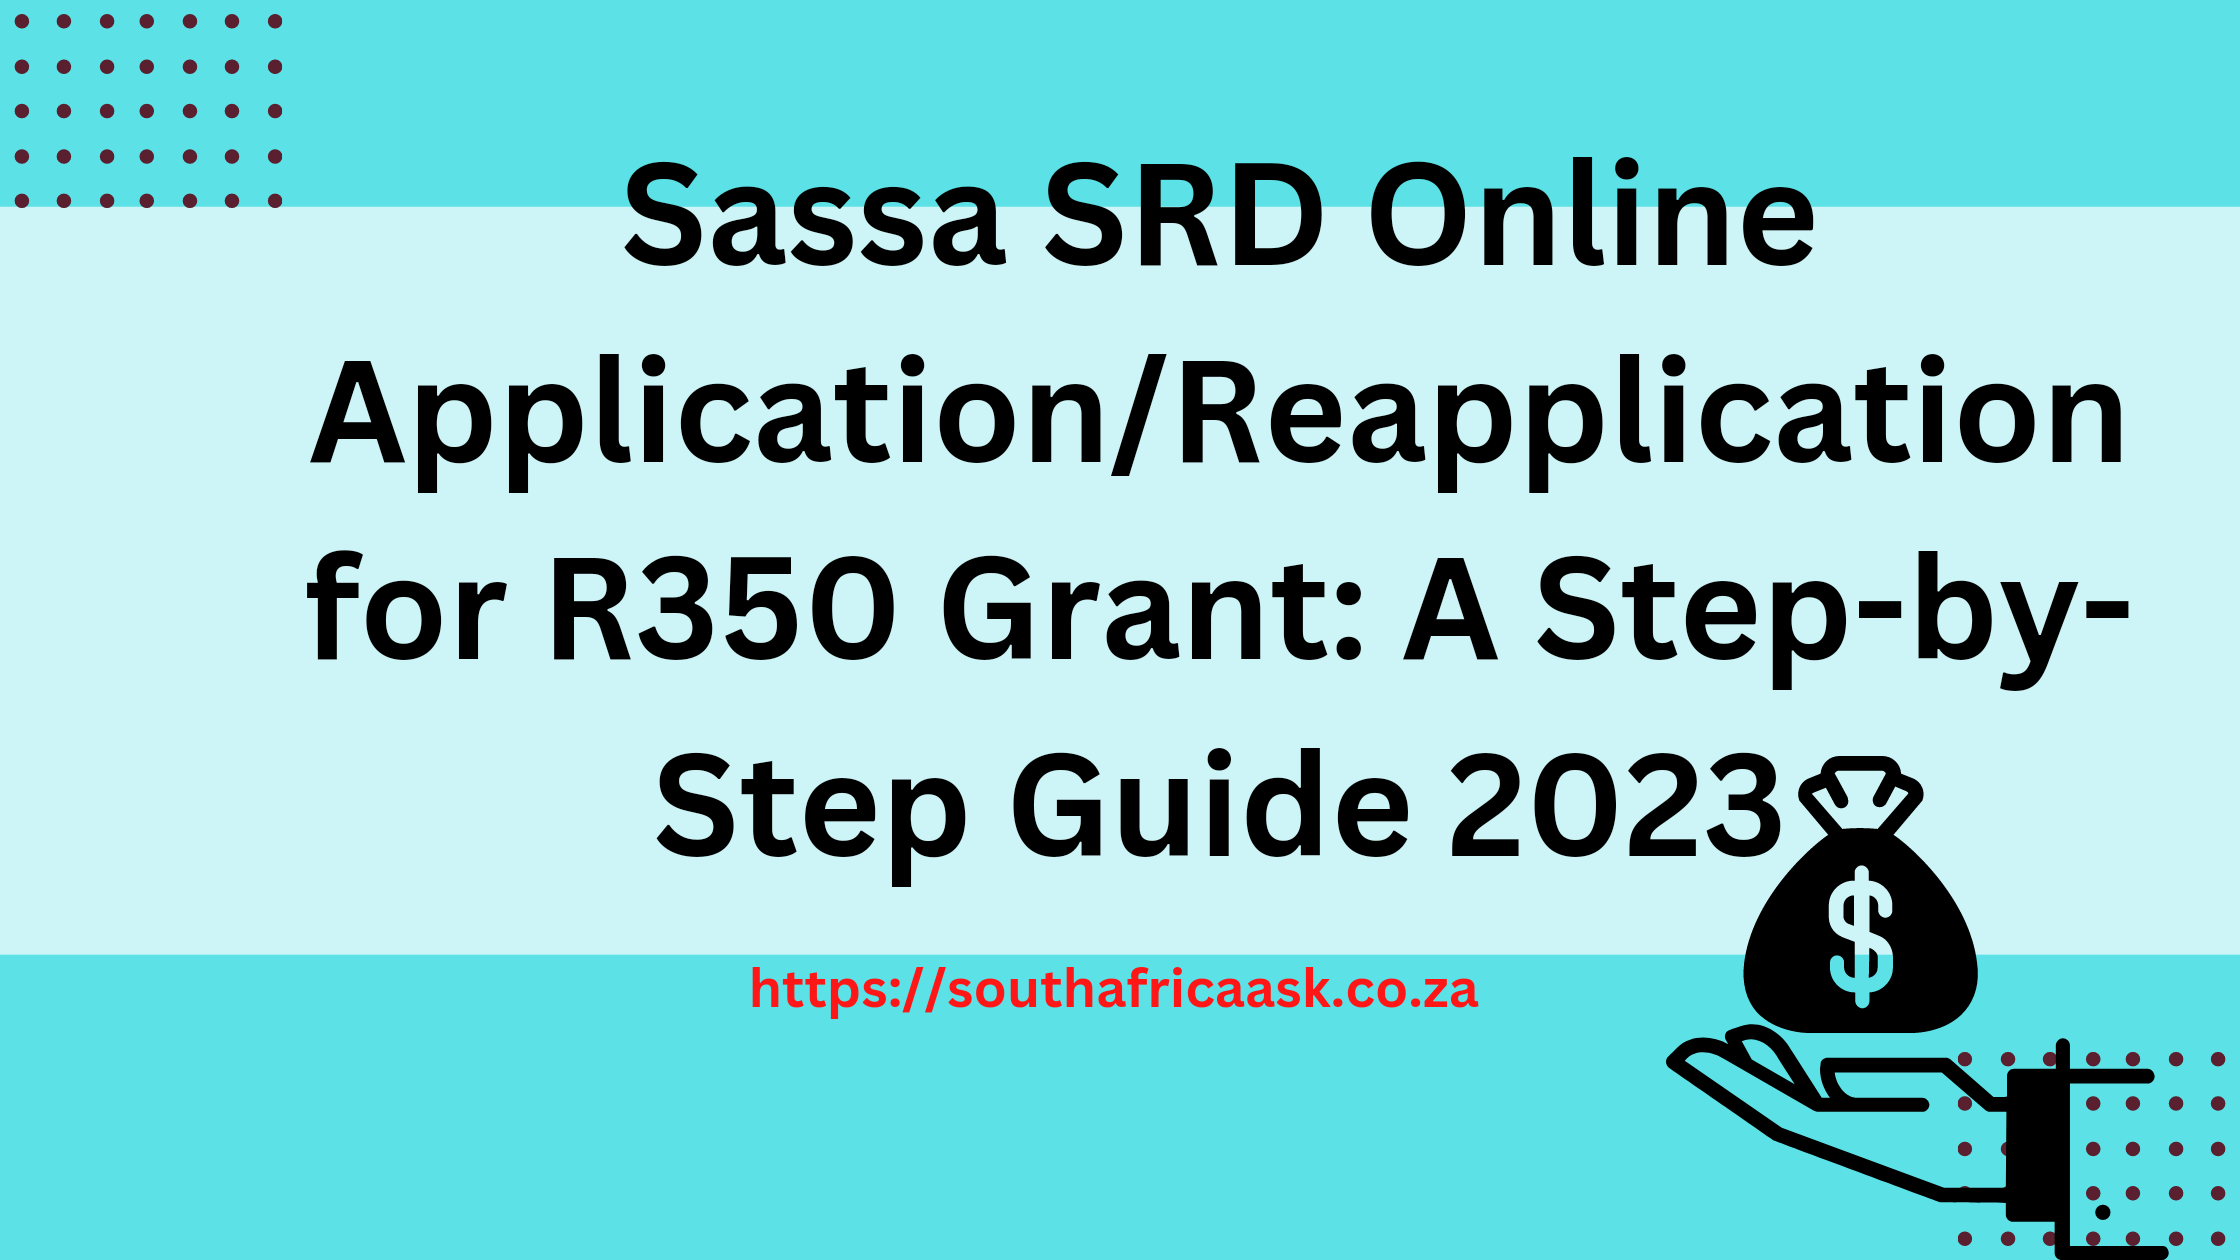 Sassa SRD Online Application/Reapplication for R350 Grant: A Step-by-Step Guide 2023